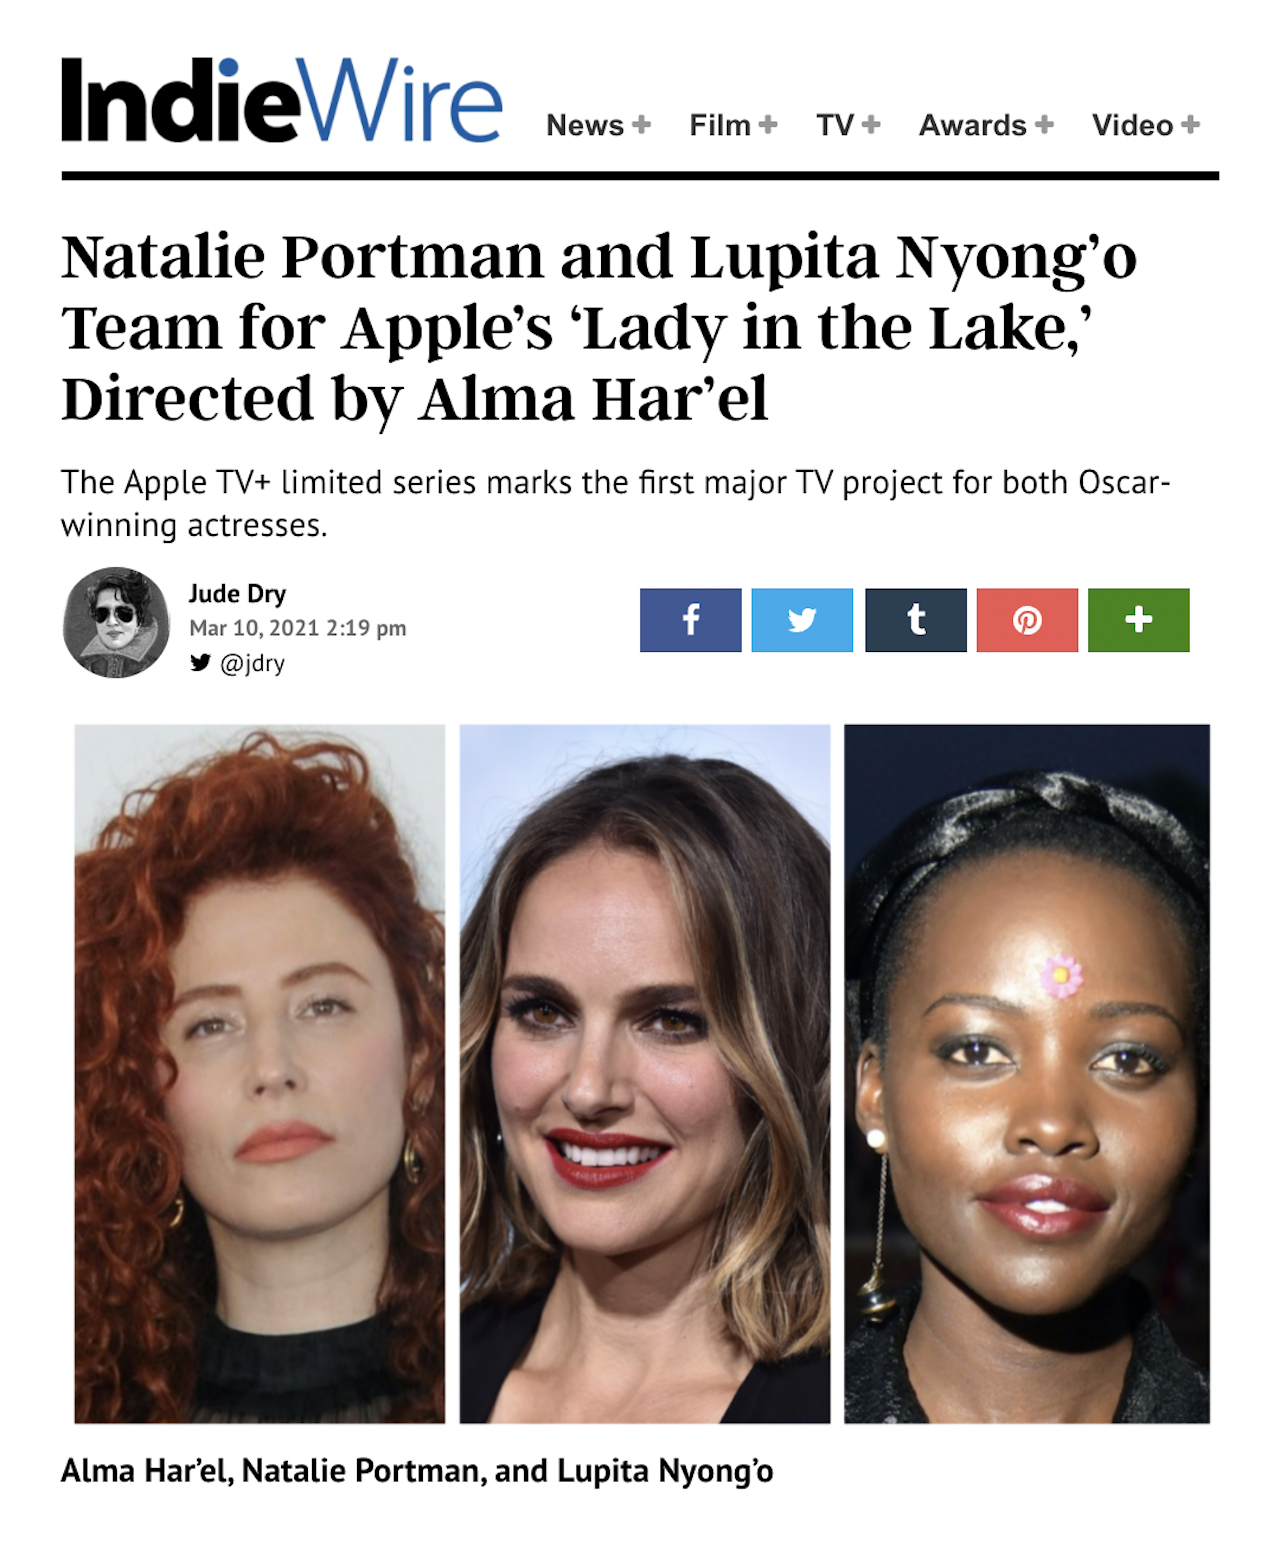 Apple gives a straight-to-series order for “Lady in the Lake”, directed and co-written by Alma Har’el